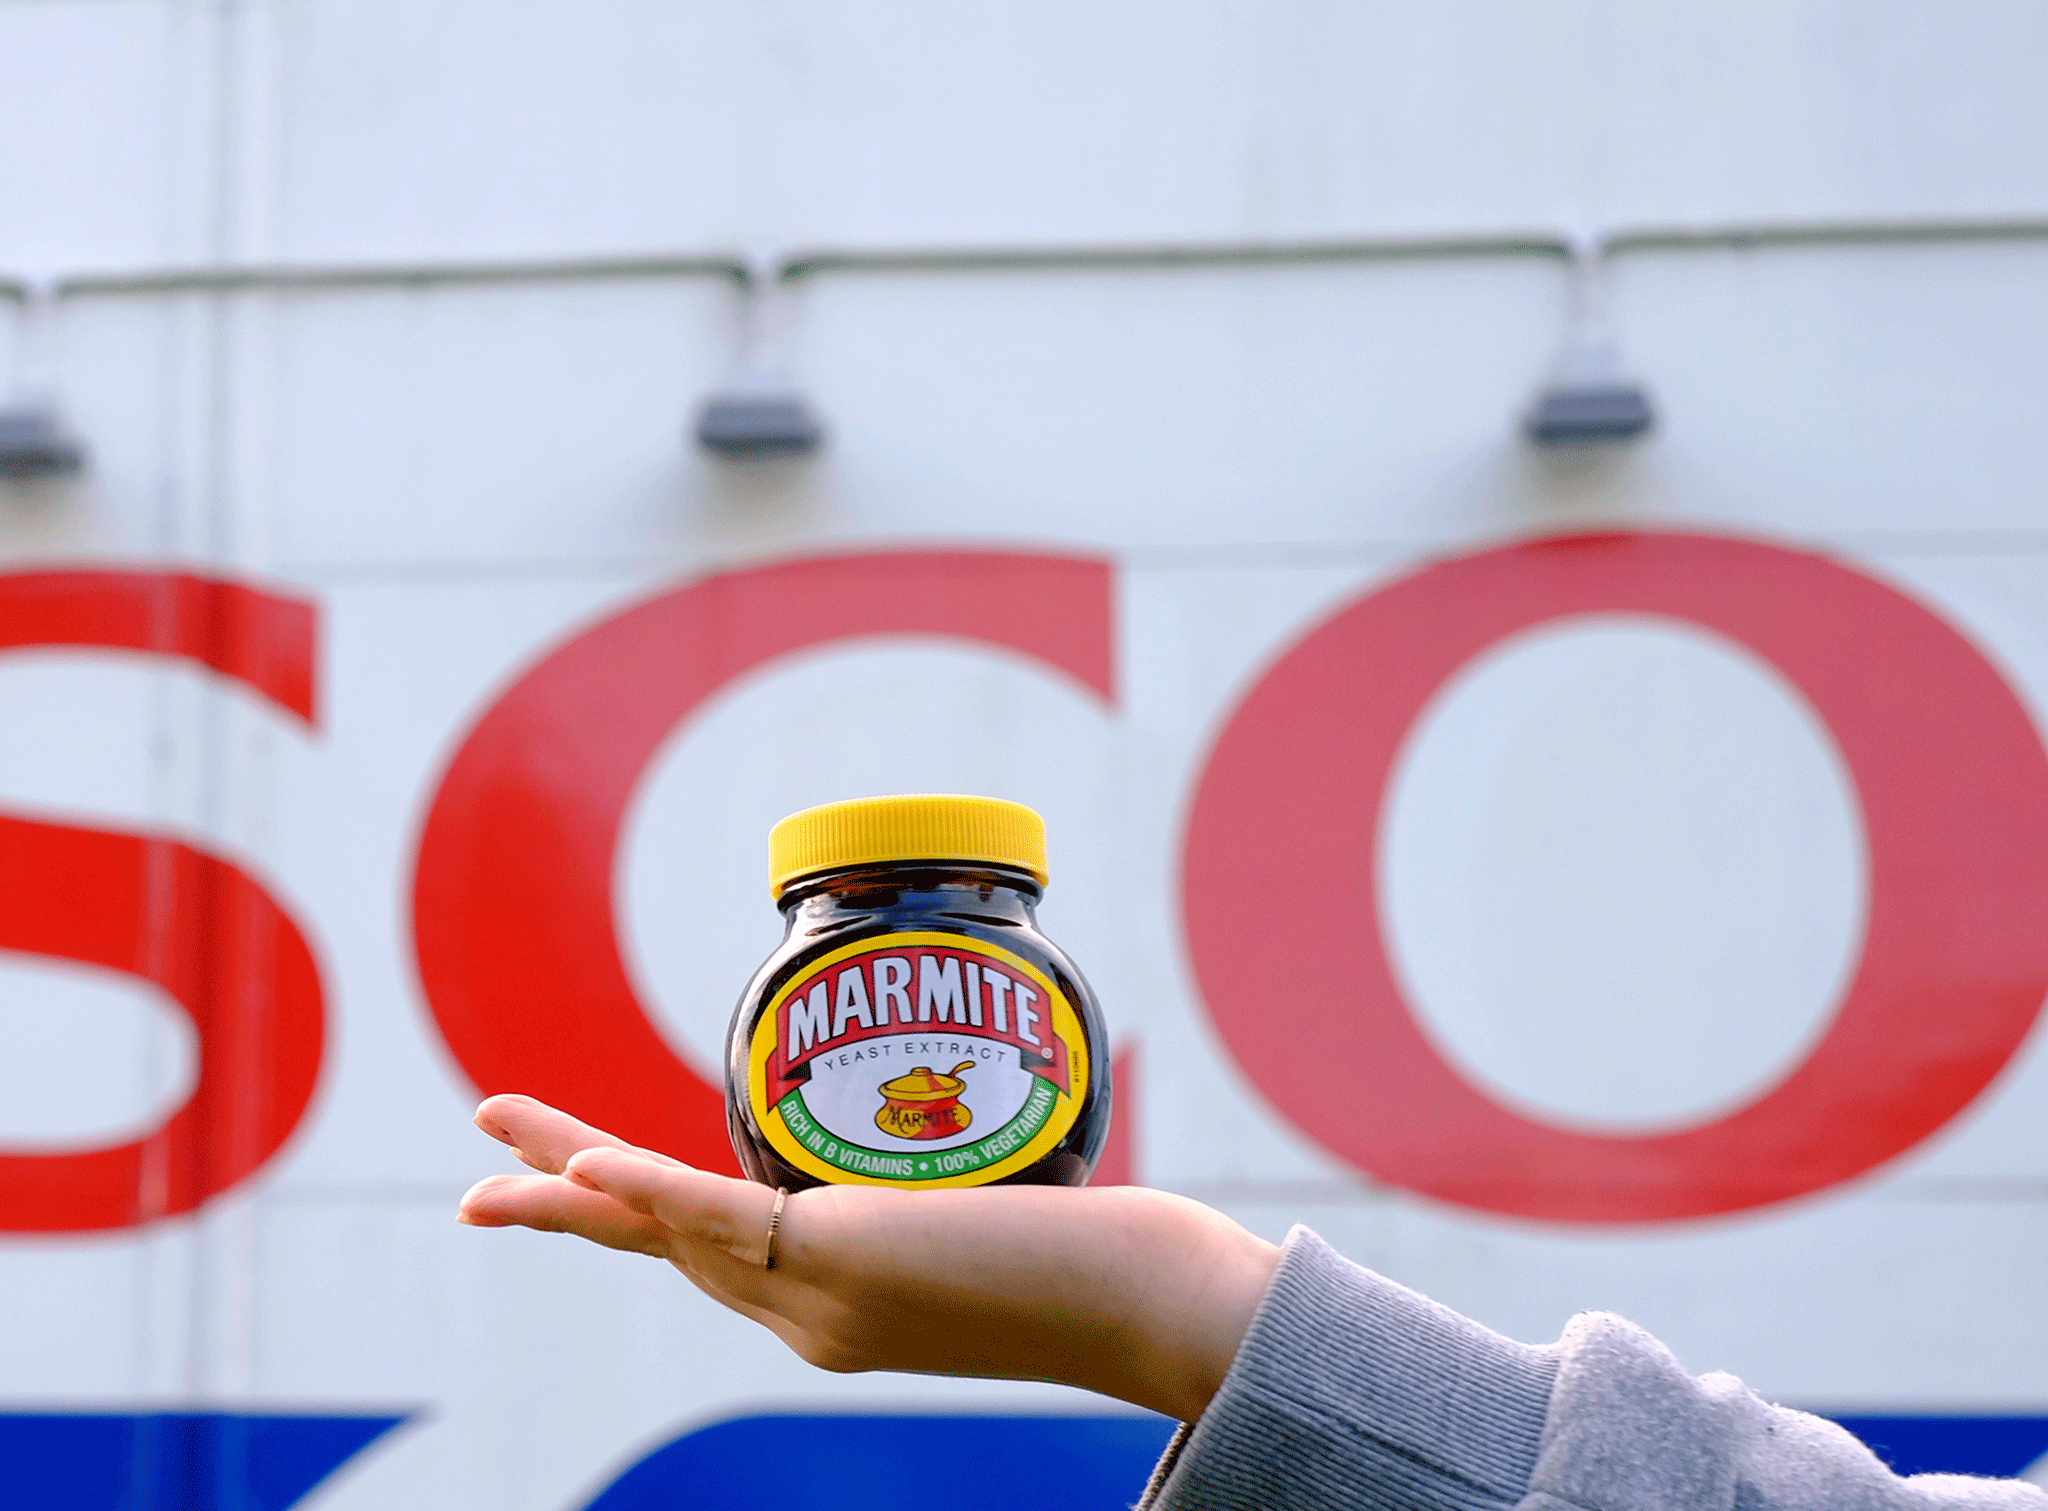 Unilever boss says Tesco Marmite row will be 'resolved soon' as Brexit pound slump dents sales